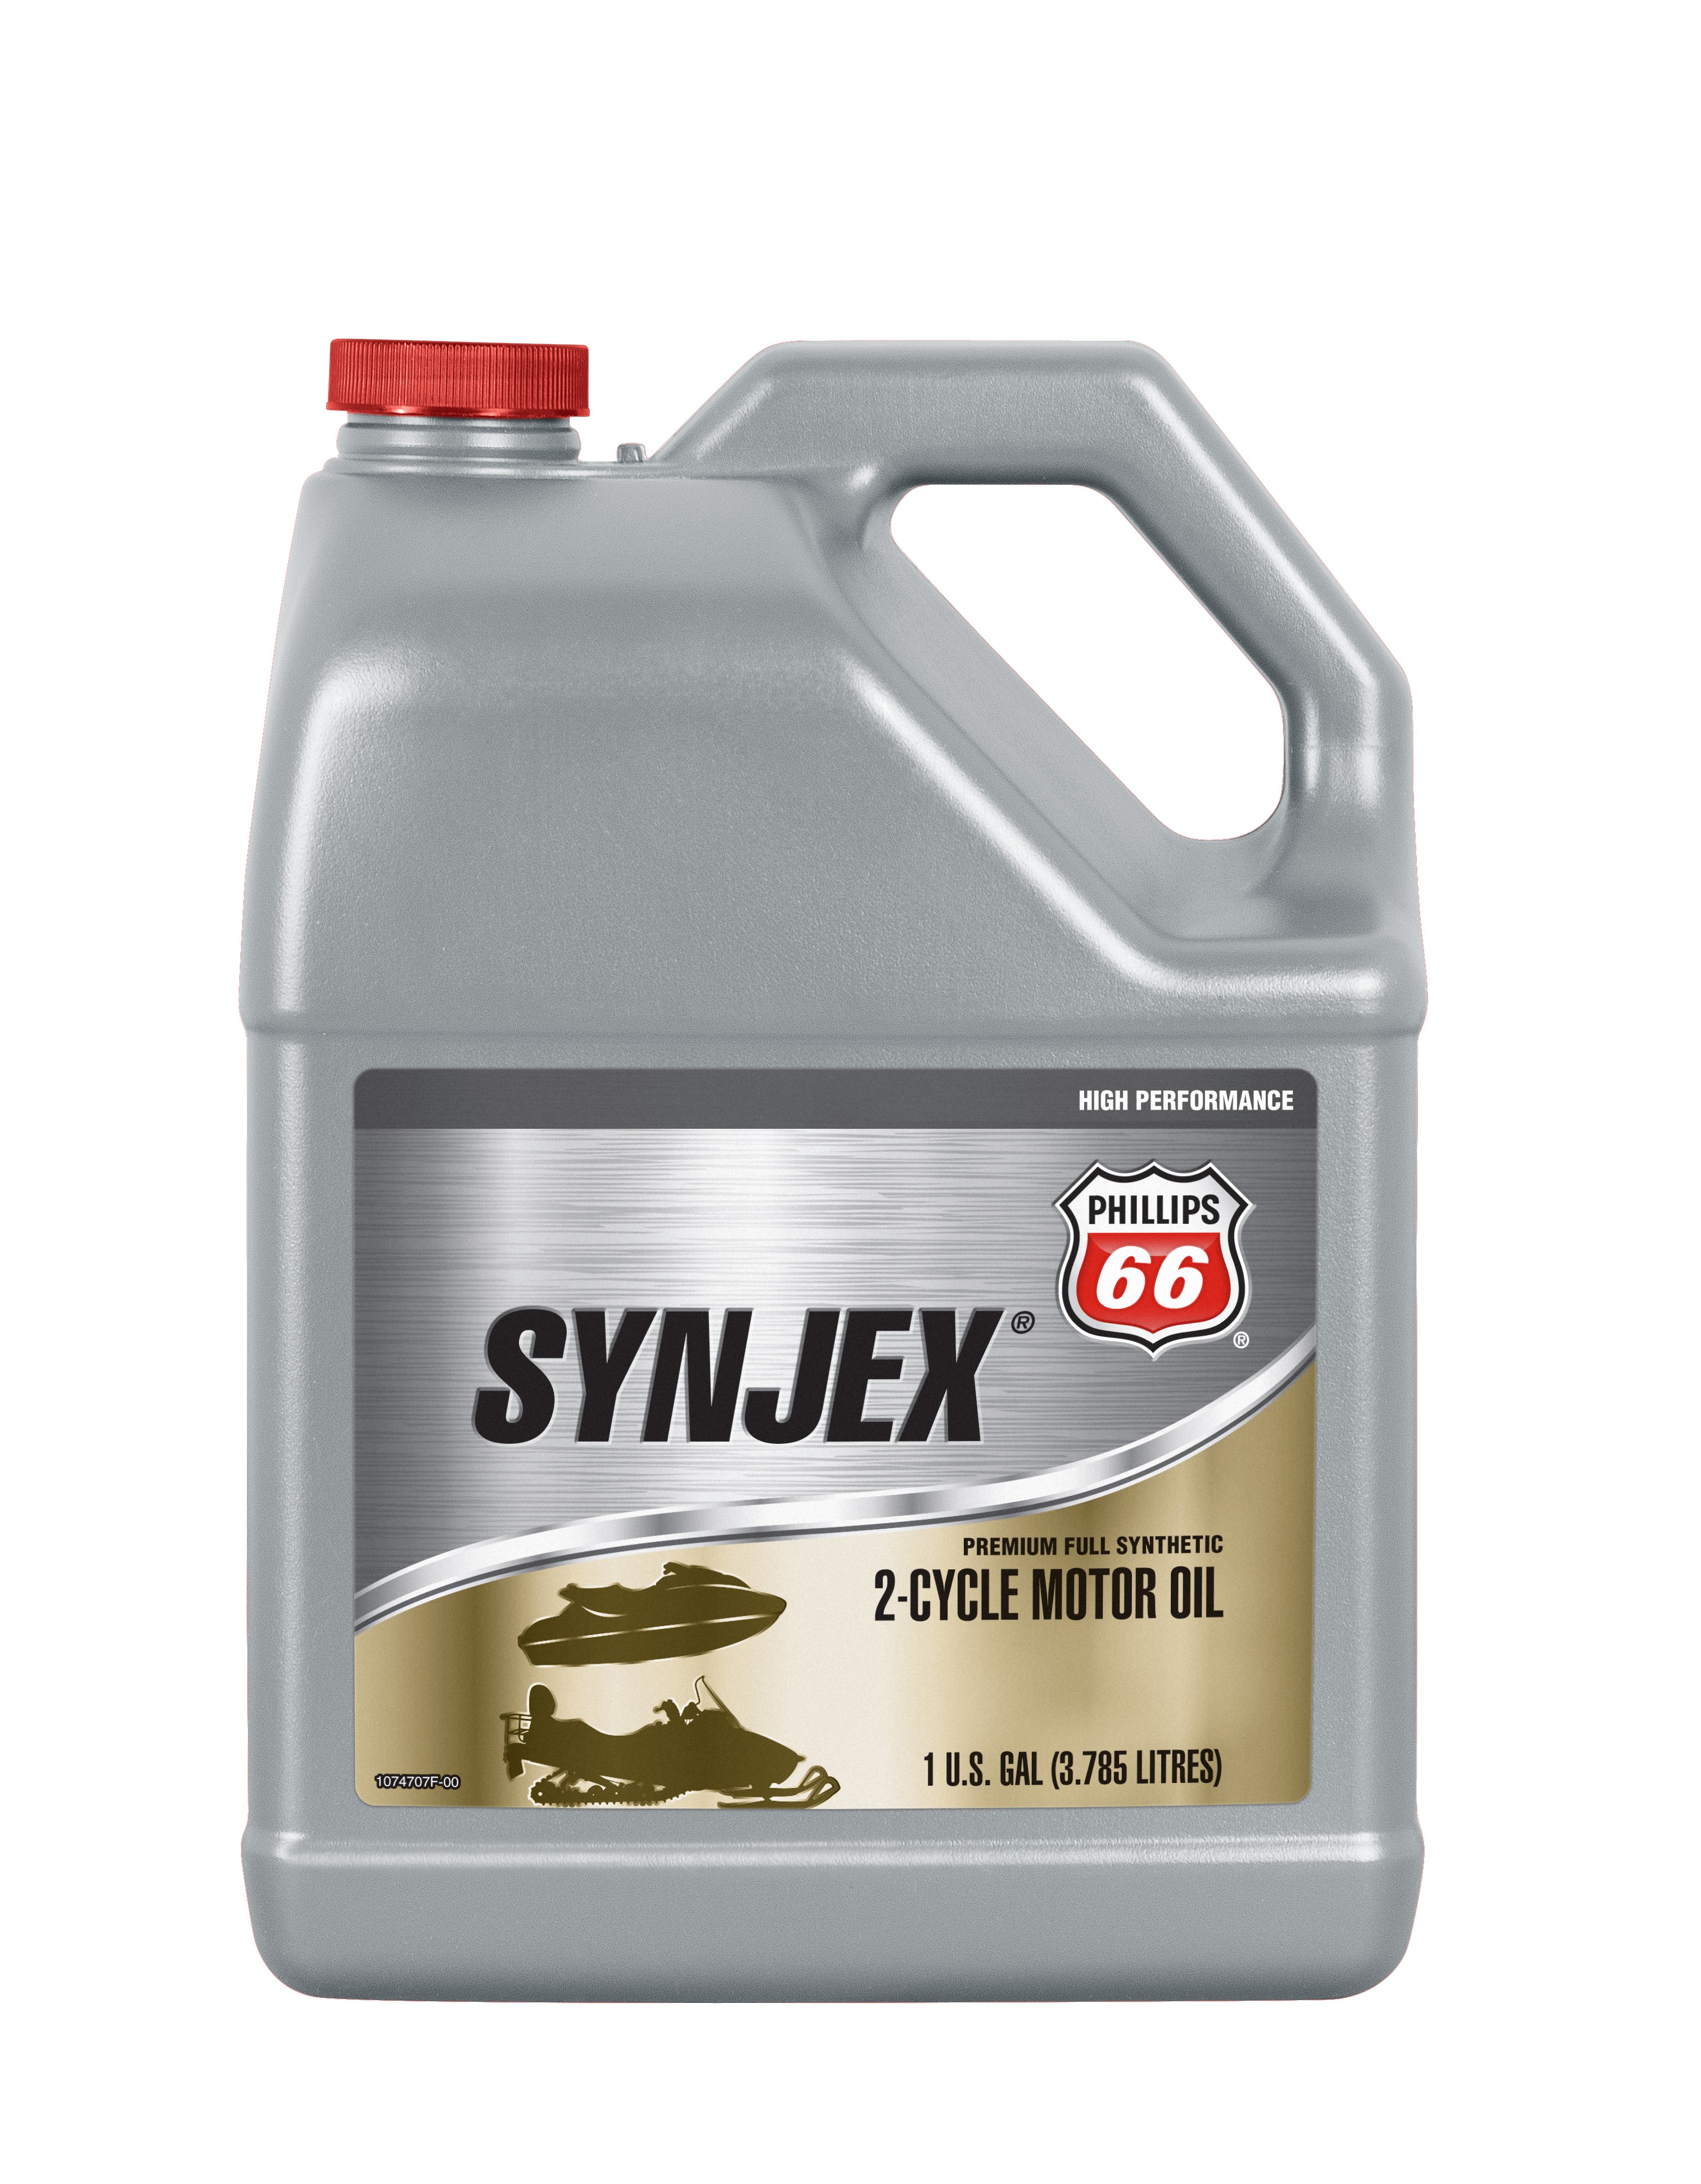 Phillips 66 Synjex Full Synthetic